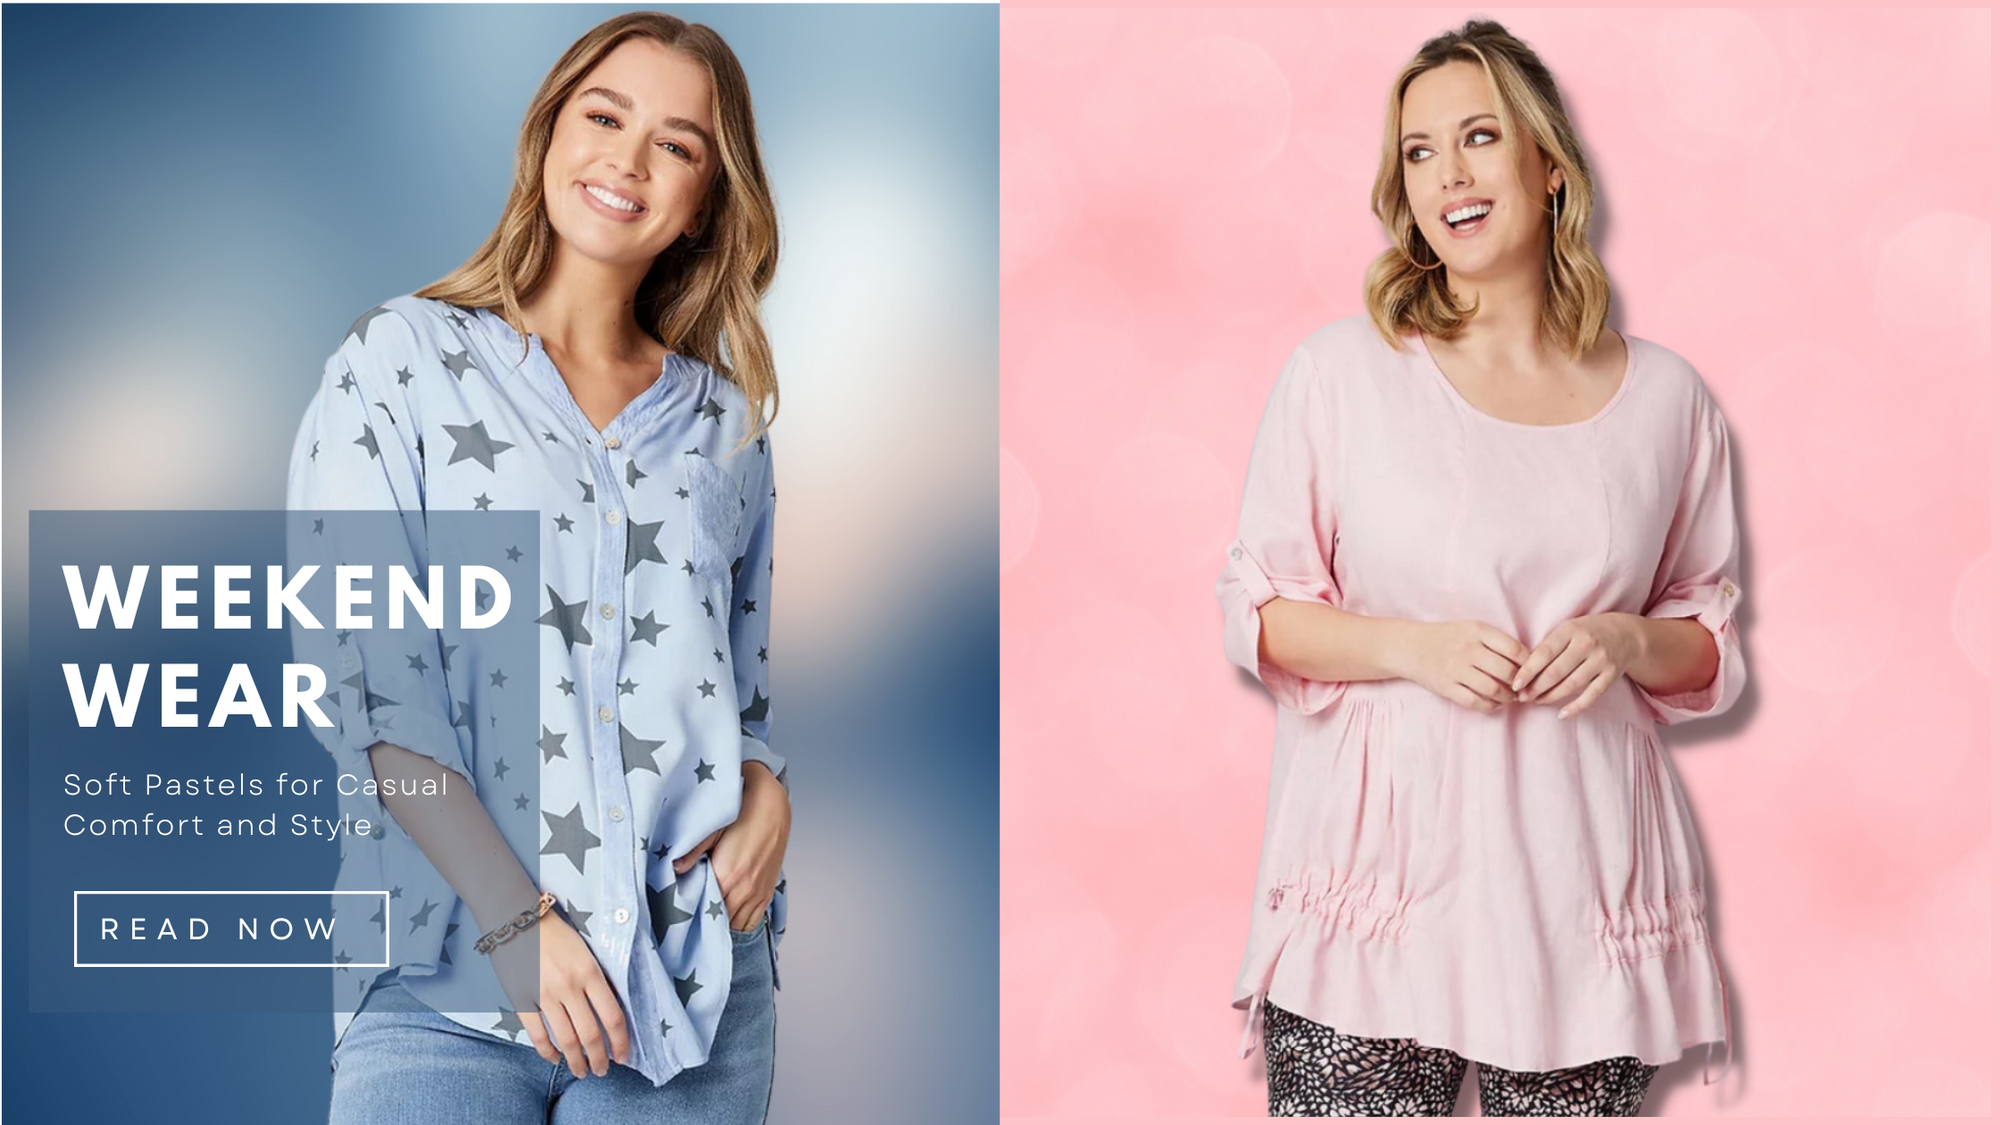 Weekend Wear - Styling Soft Pastels for Casual Comfort and Style at Kindred Spirit Boutique 